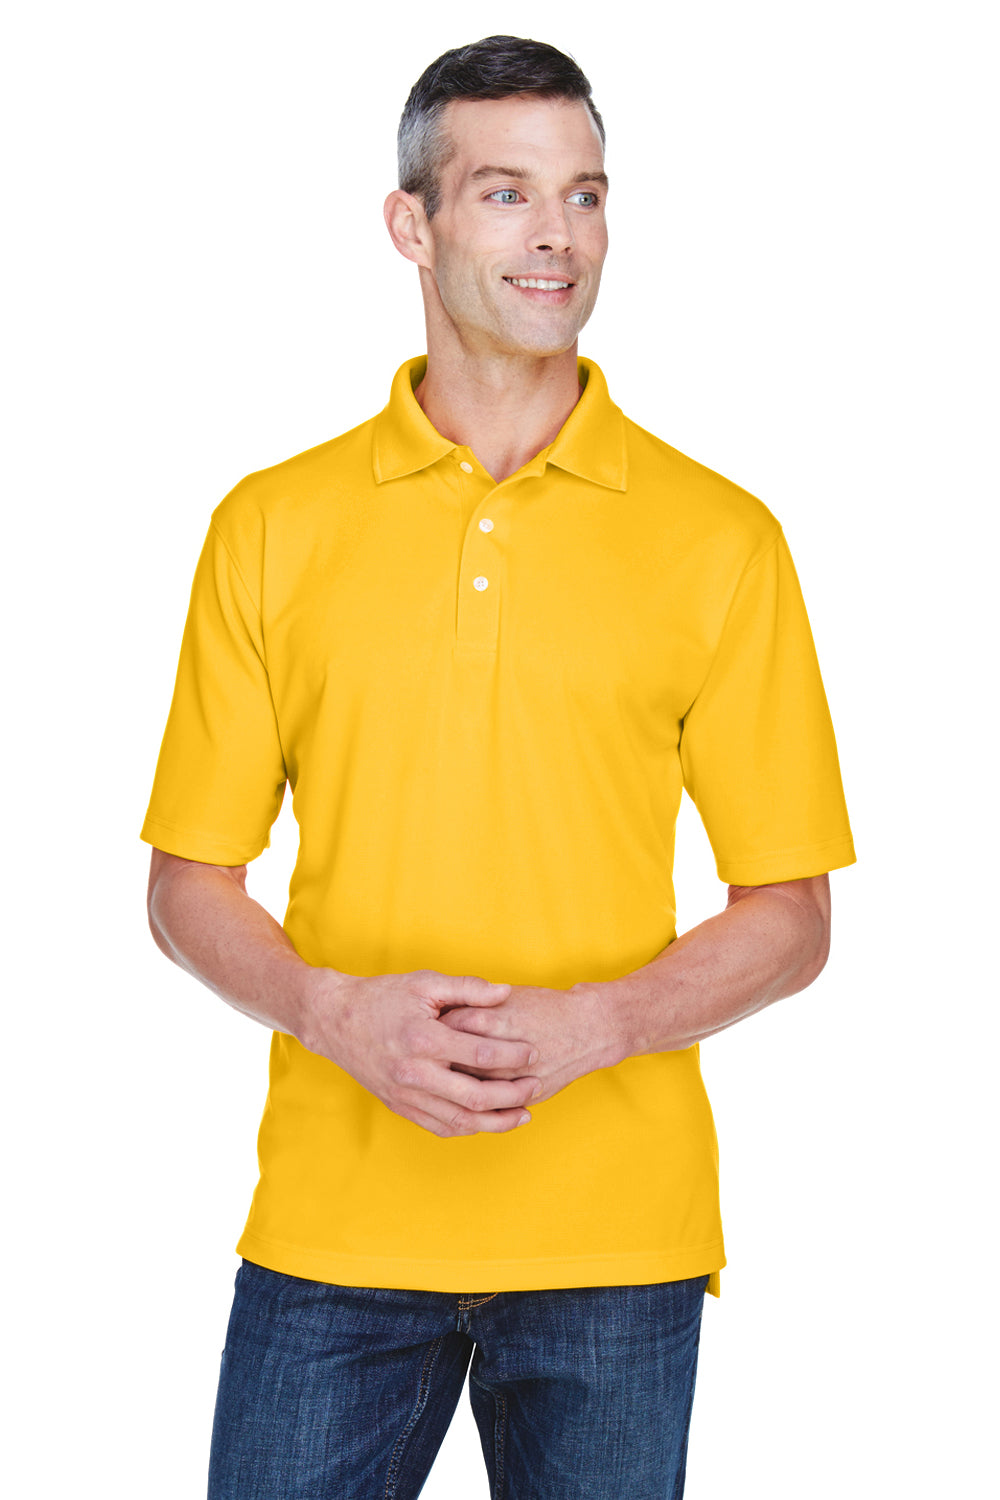 UltraClub 8445 Mens Cool & Dry Performance Moisture Wicking Short Sleeve Polo Shirt Gold Front